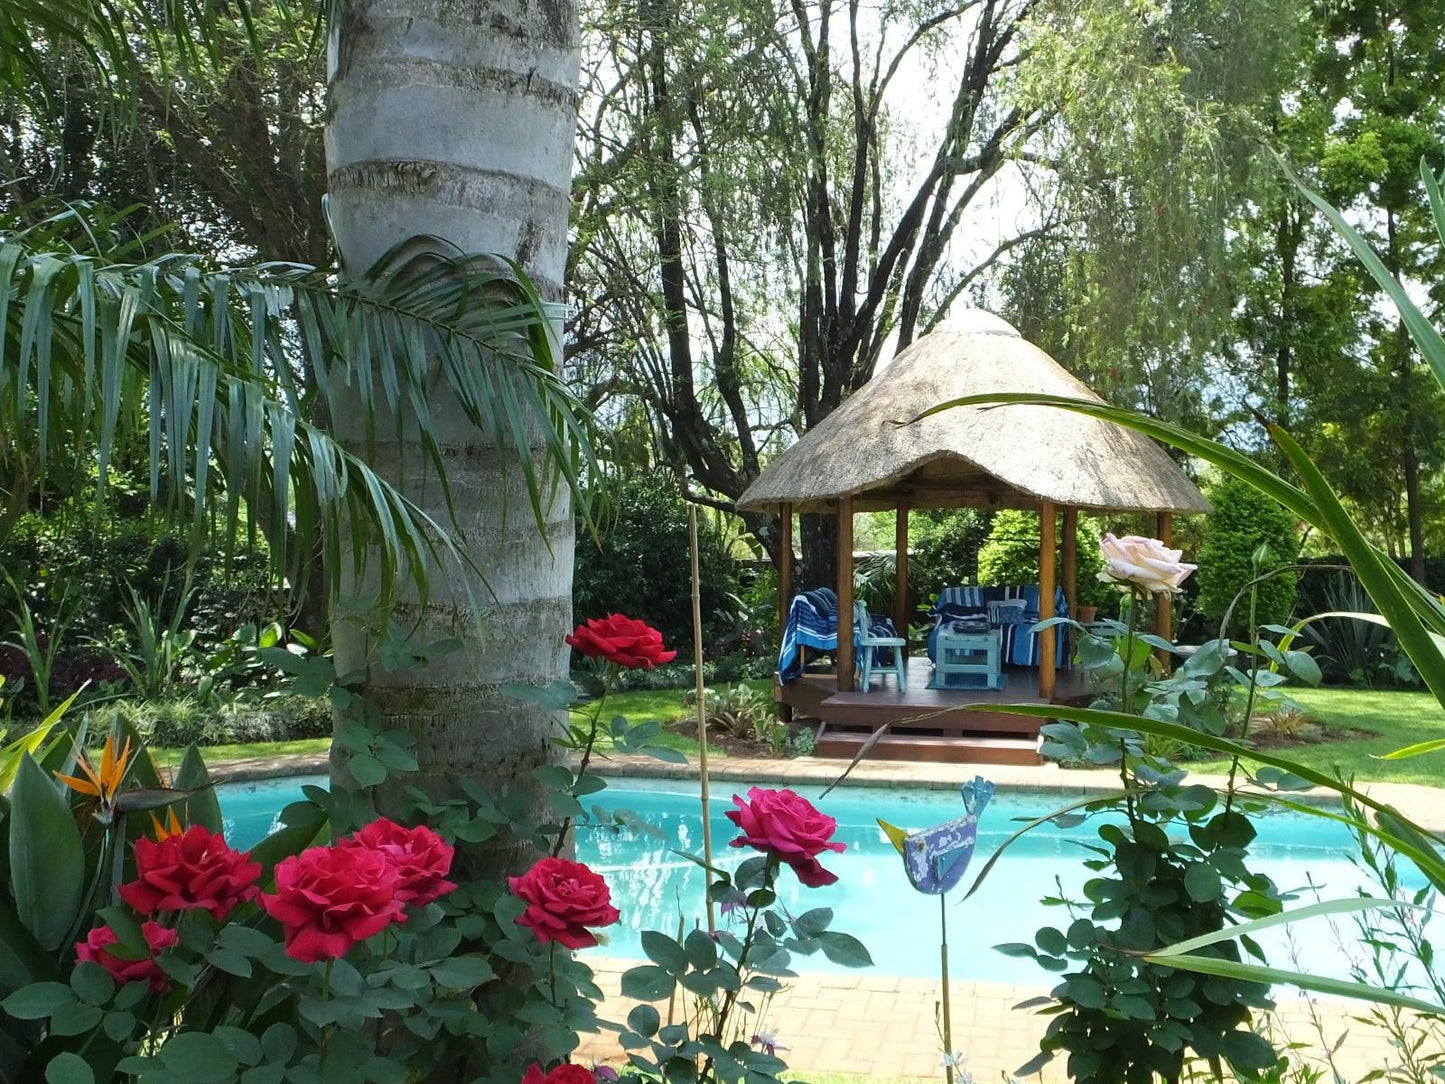 Dublin Guest Lodge Sabie Mpumalanga South Africa Plant, Nature, Garden, Swimming Pool